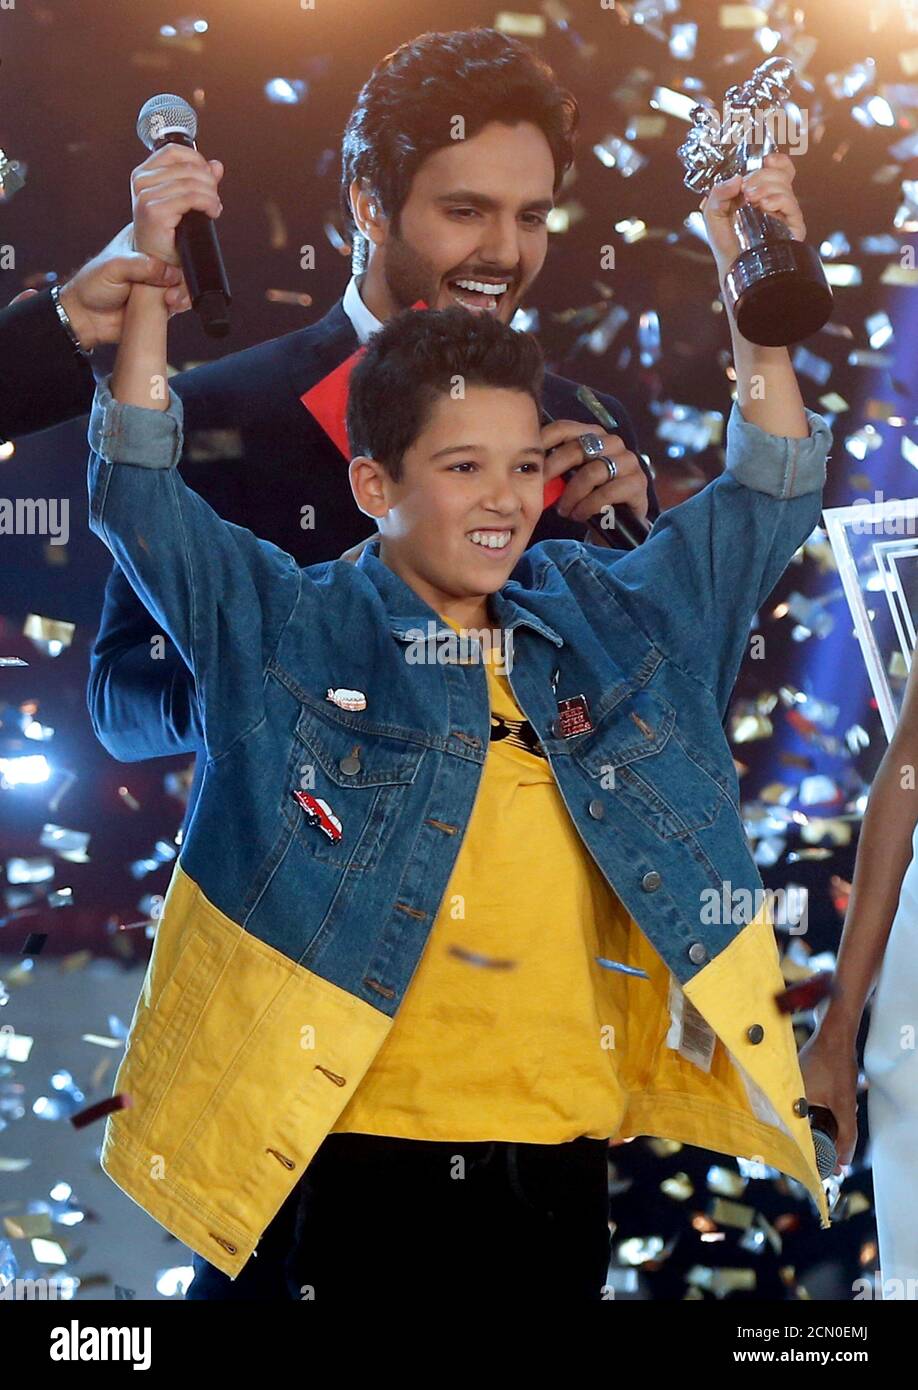 Hamza Labyad celebrates during the final of 'The Voice Kids' singing competition in Beirut, Lebanon February 3, 2018. REUTERS/Mohamed Azakir Stock Photo